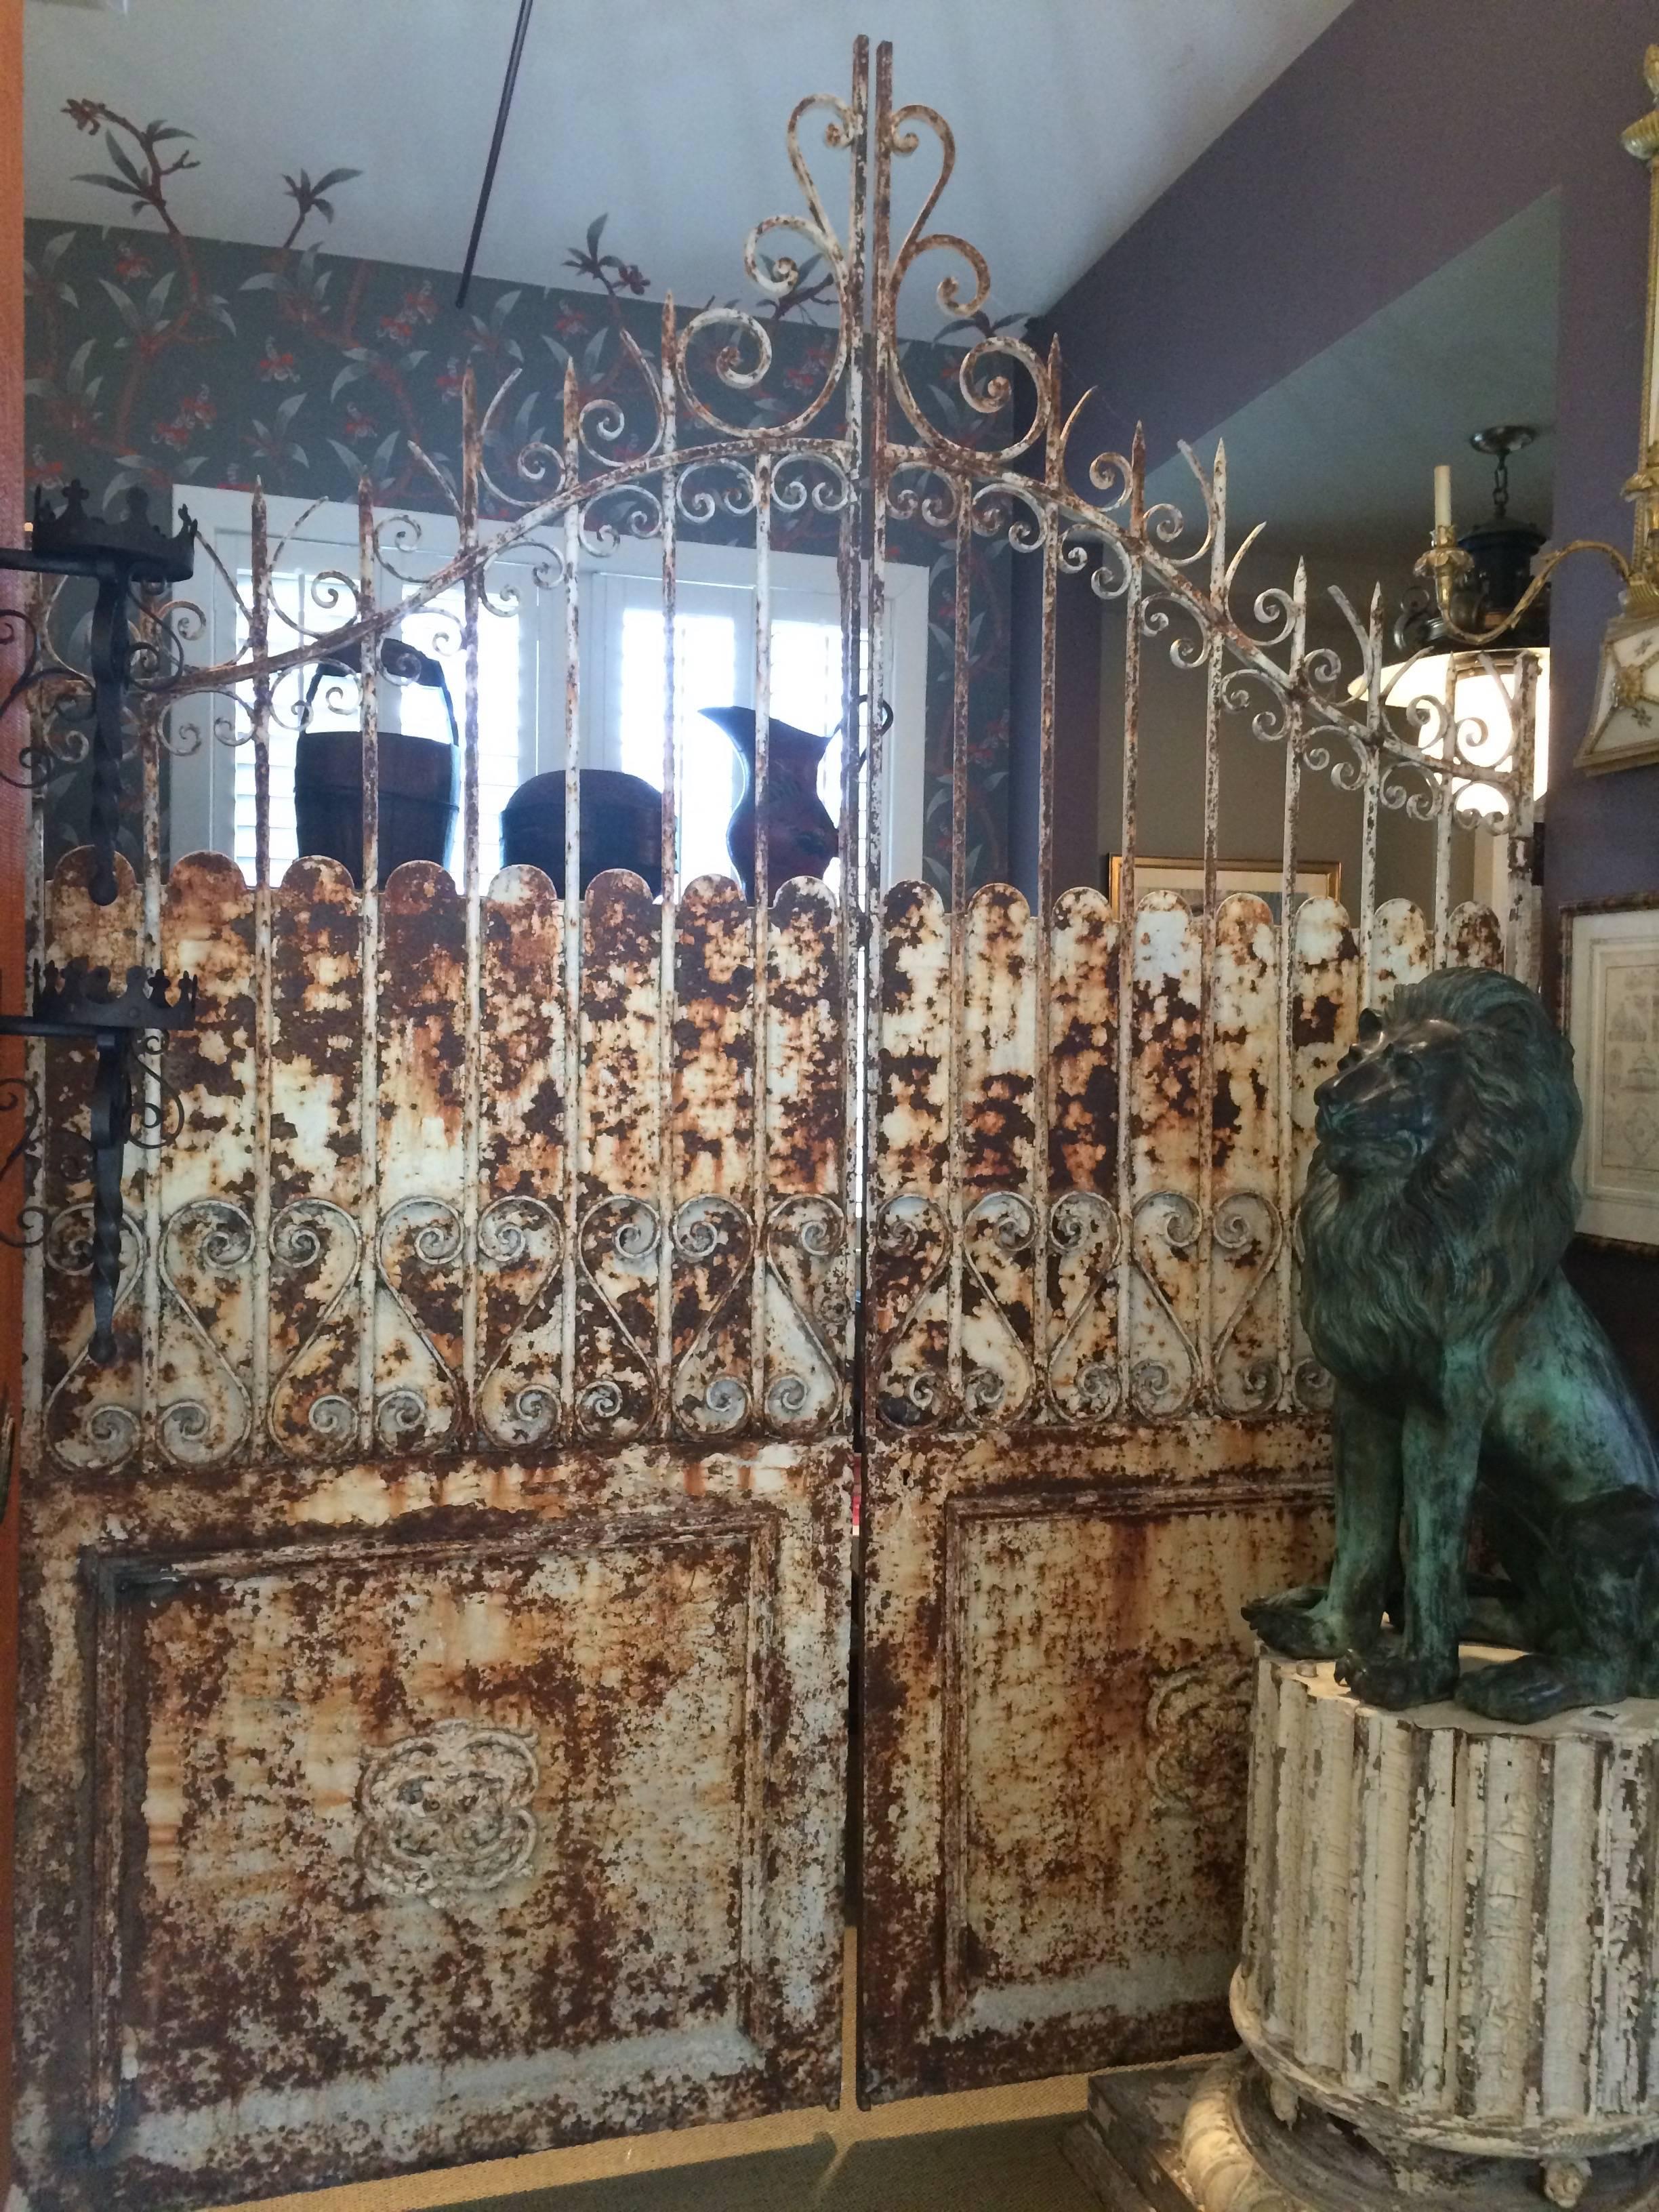 Unknown Monumental Pair of Distressed Iron Palace Garden Gates